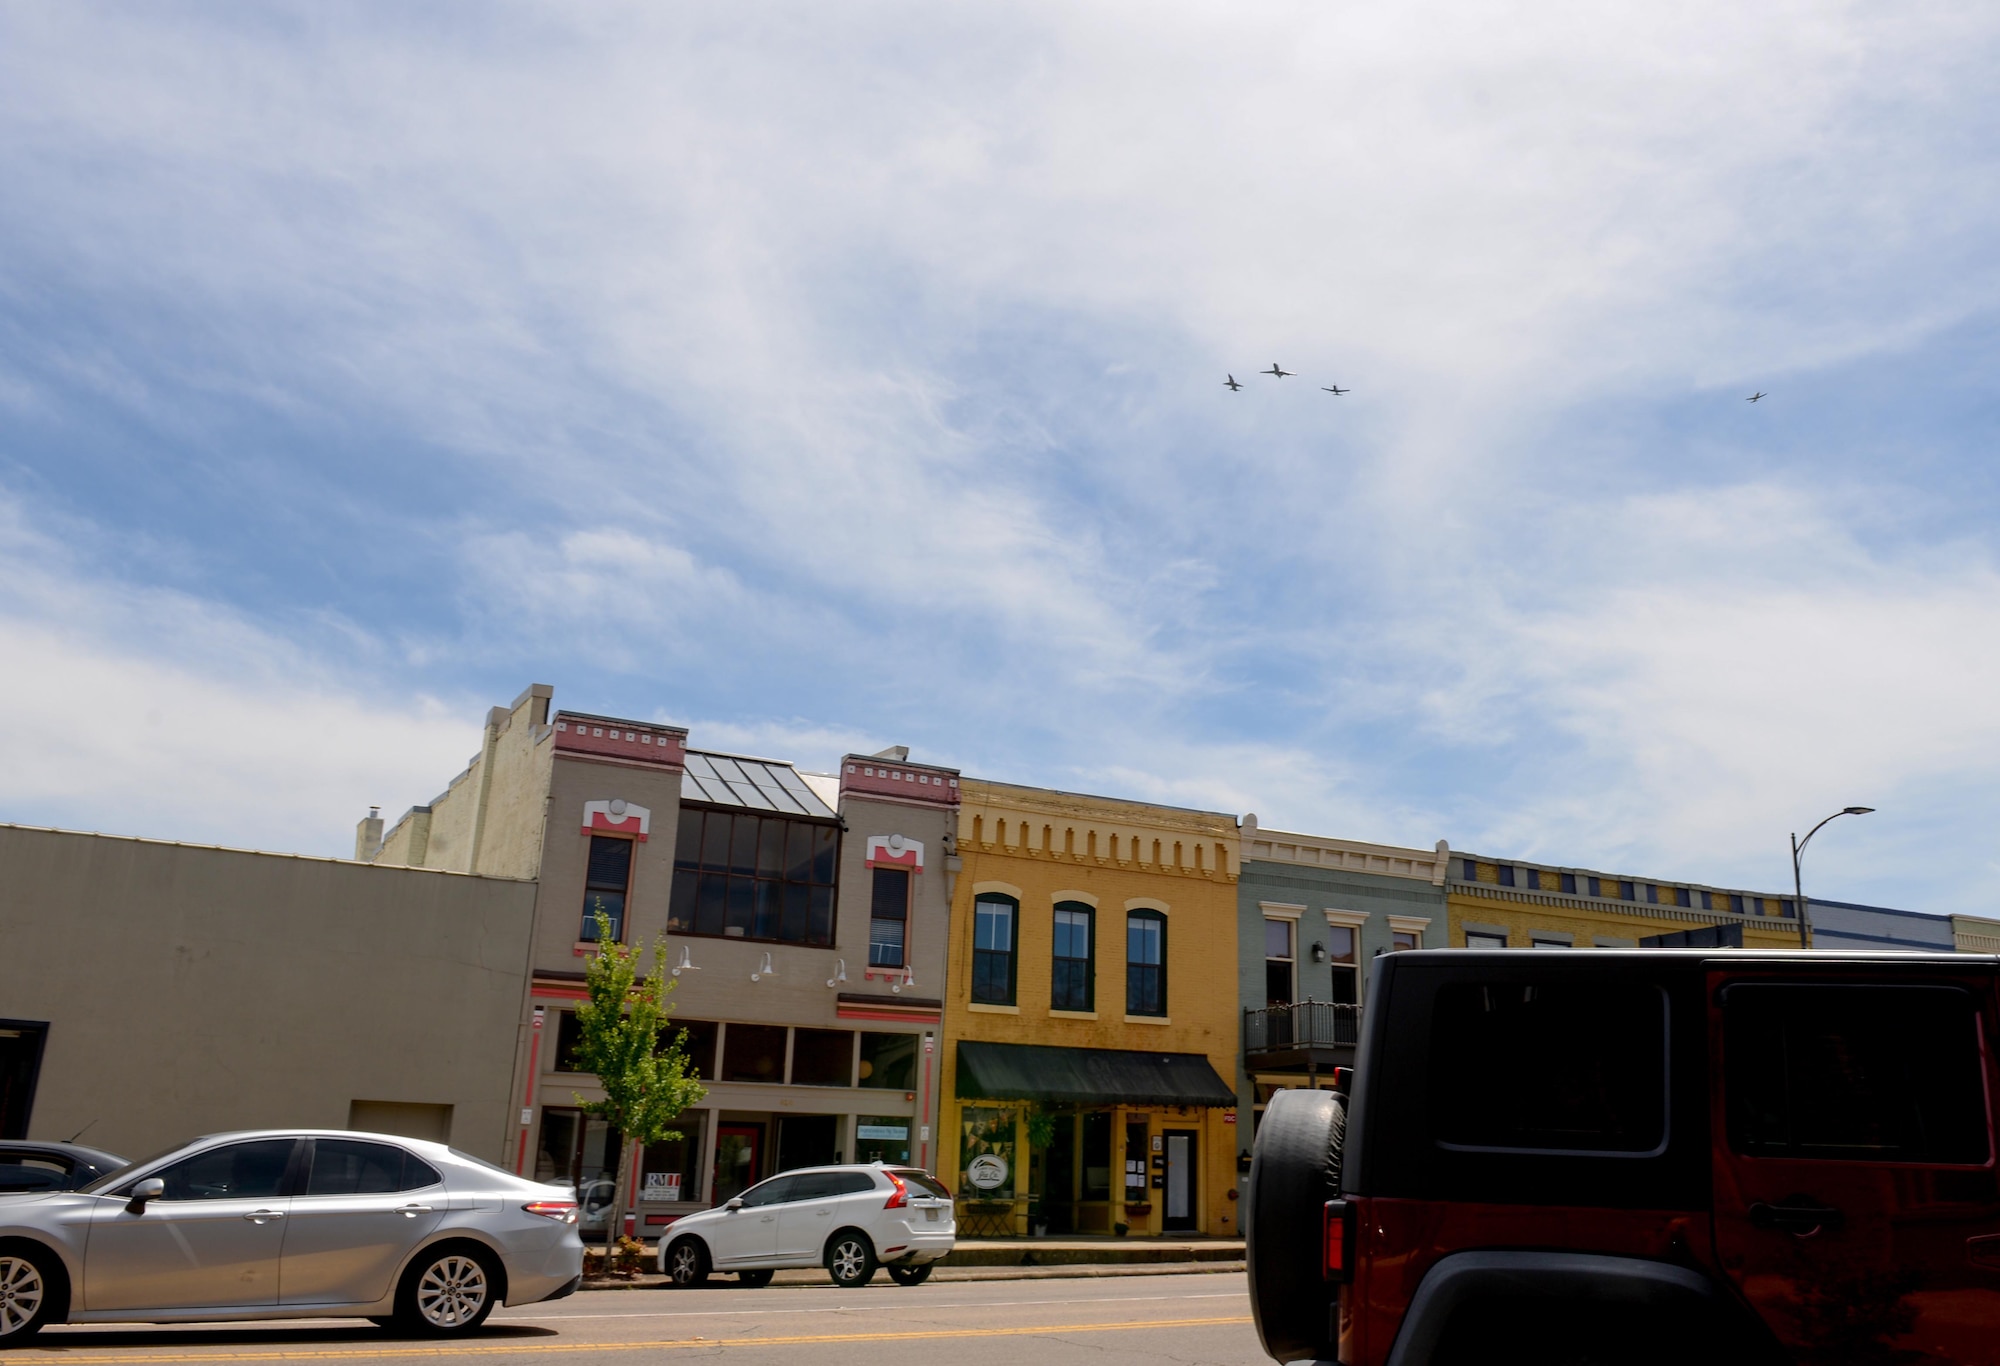 A dissimilar formation of aircraft from Columbus Air Force Base, Miss., fly over Main Street in Columbus, Miss. on May 9, 2020. The flyover was an opportunity to honor the men and women on the front lines in the fight against COVID-19 during the Defense Department’s #AmericaStrong salute. The flyover consisted of the T-6A Texan II, T-1A Jayhawk and the T-38 Talon. (U.S. Air Force photo by Airman 1st Class Davis Donaldson)